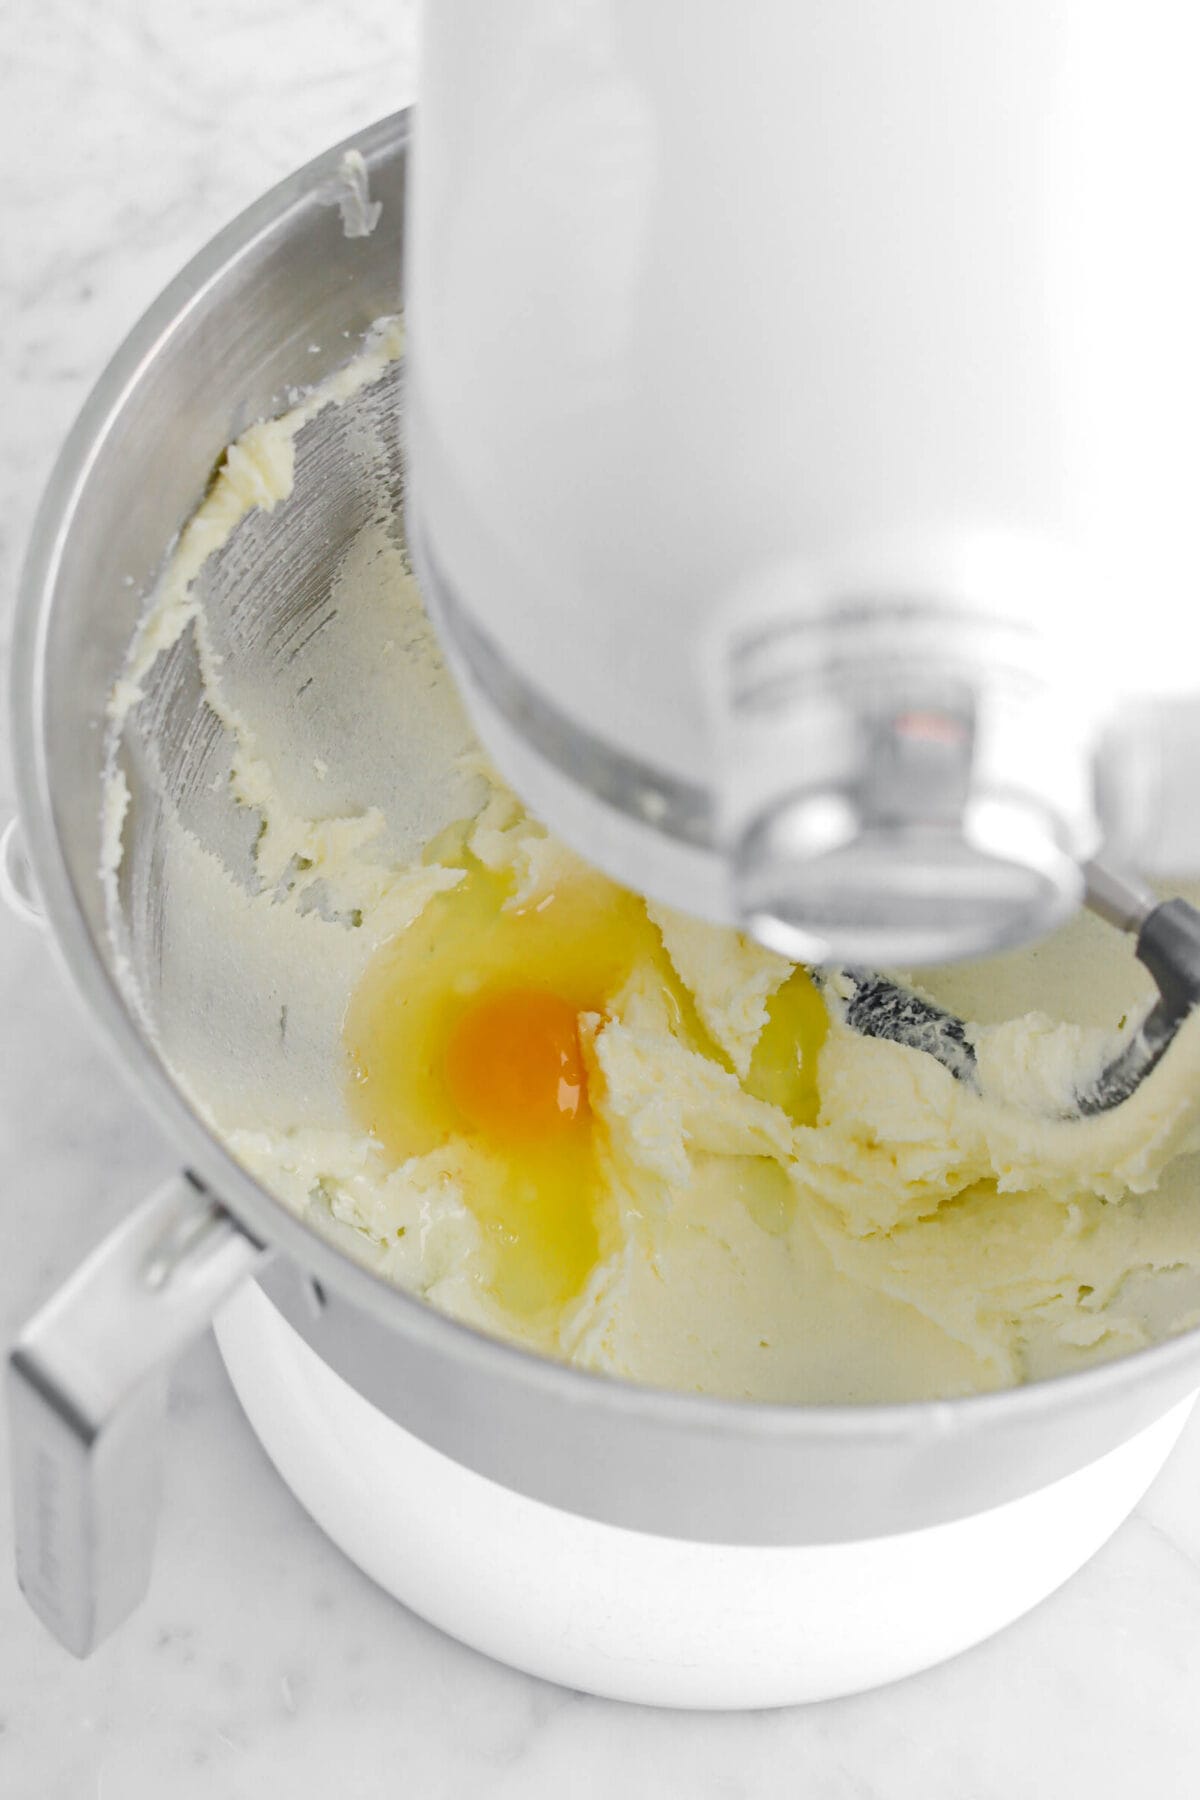 egg added to butter and sugar mixture.